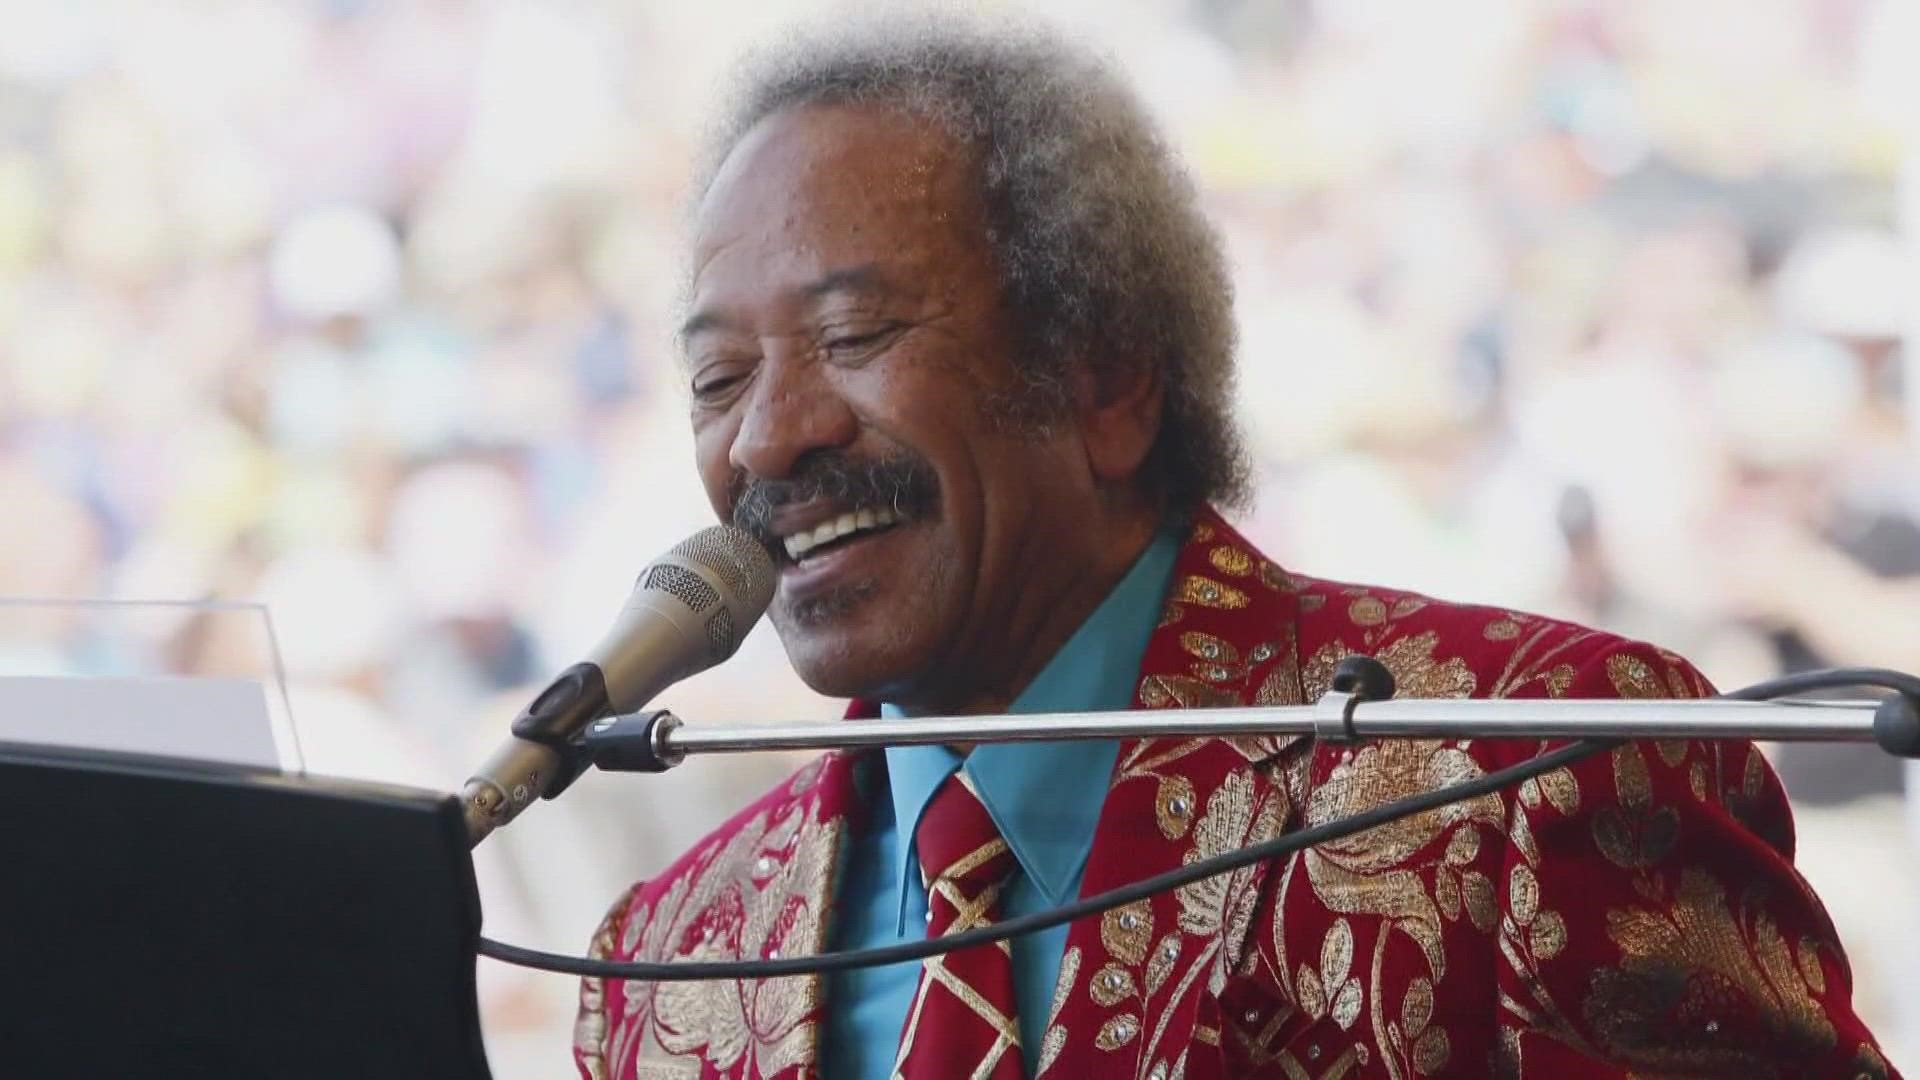 The city of New Orleans is in the process of renaming Robert E. Lee Blvd. in favor of musician and composer Allen Toussaint.